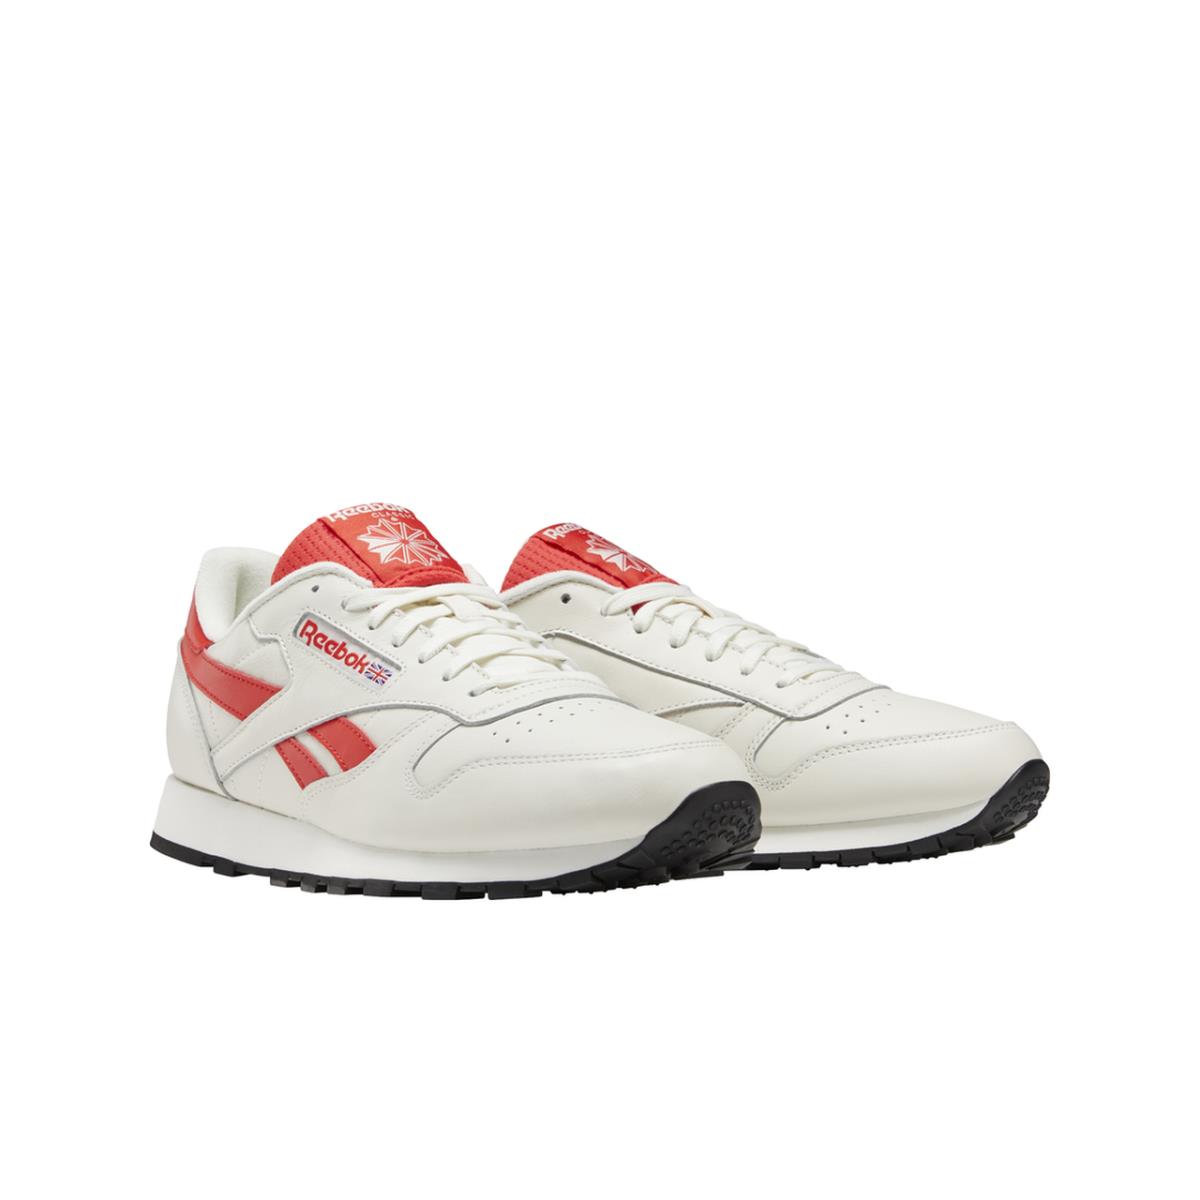 Reebok shoes Classic Leather - Chalk/Rad Red 0